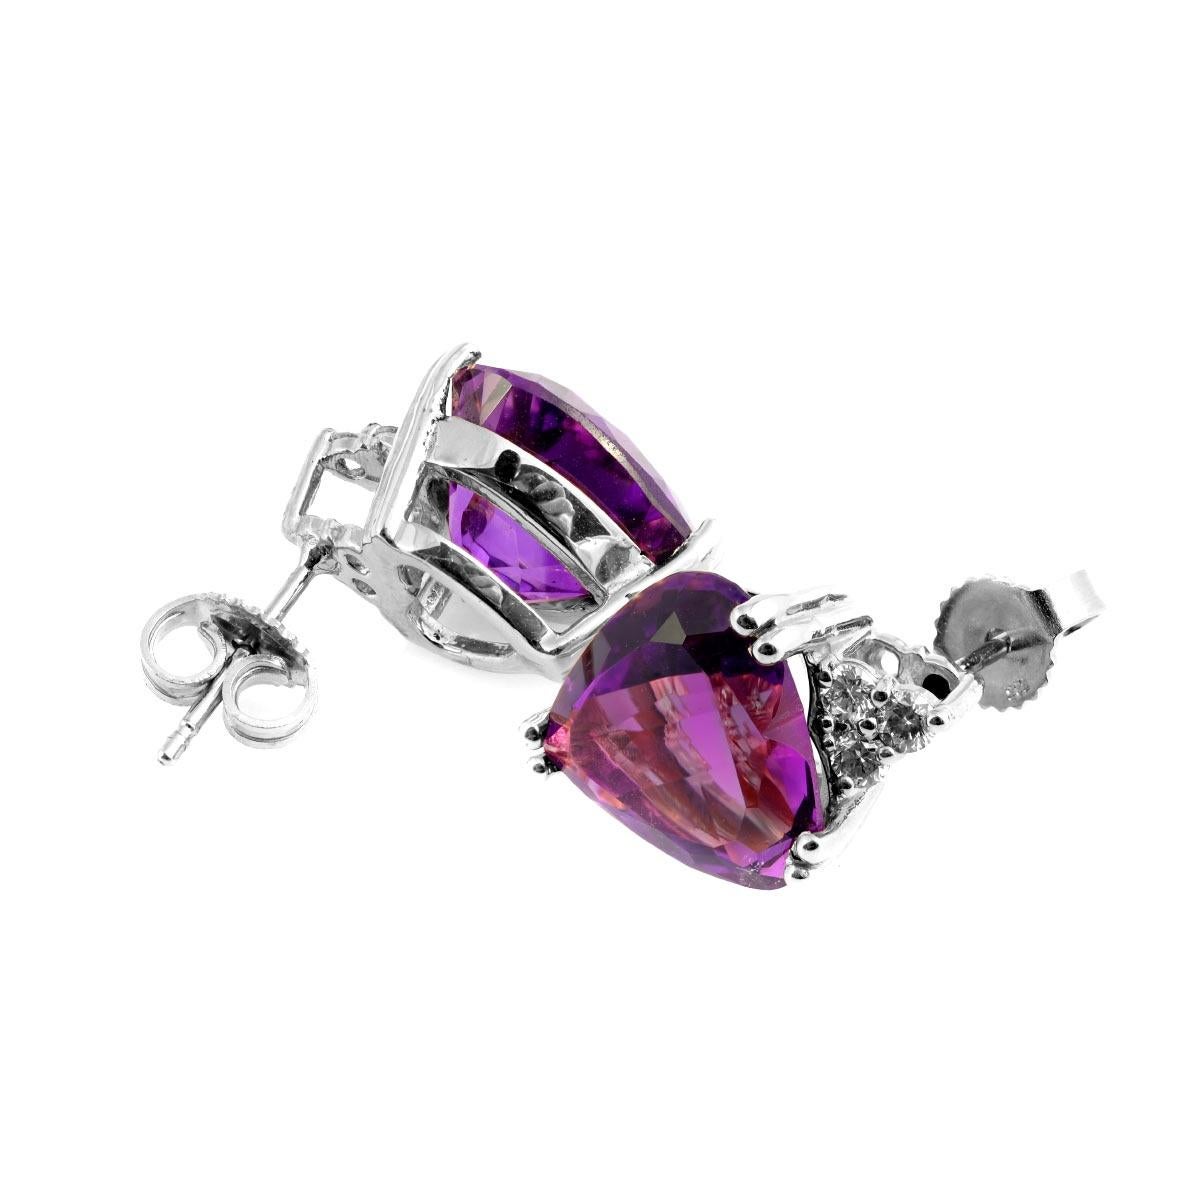 A luminous pair of Amethyst hearts, here is a pair of utilitarian earrings that will complement any outfit. Easy to wear and light weight, this is a pick she will fall instantly in love with. Diamonds that lend a beautiful sparkle to the entire